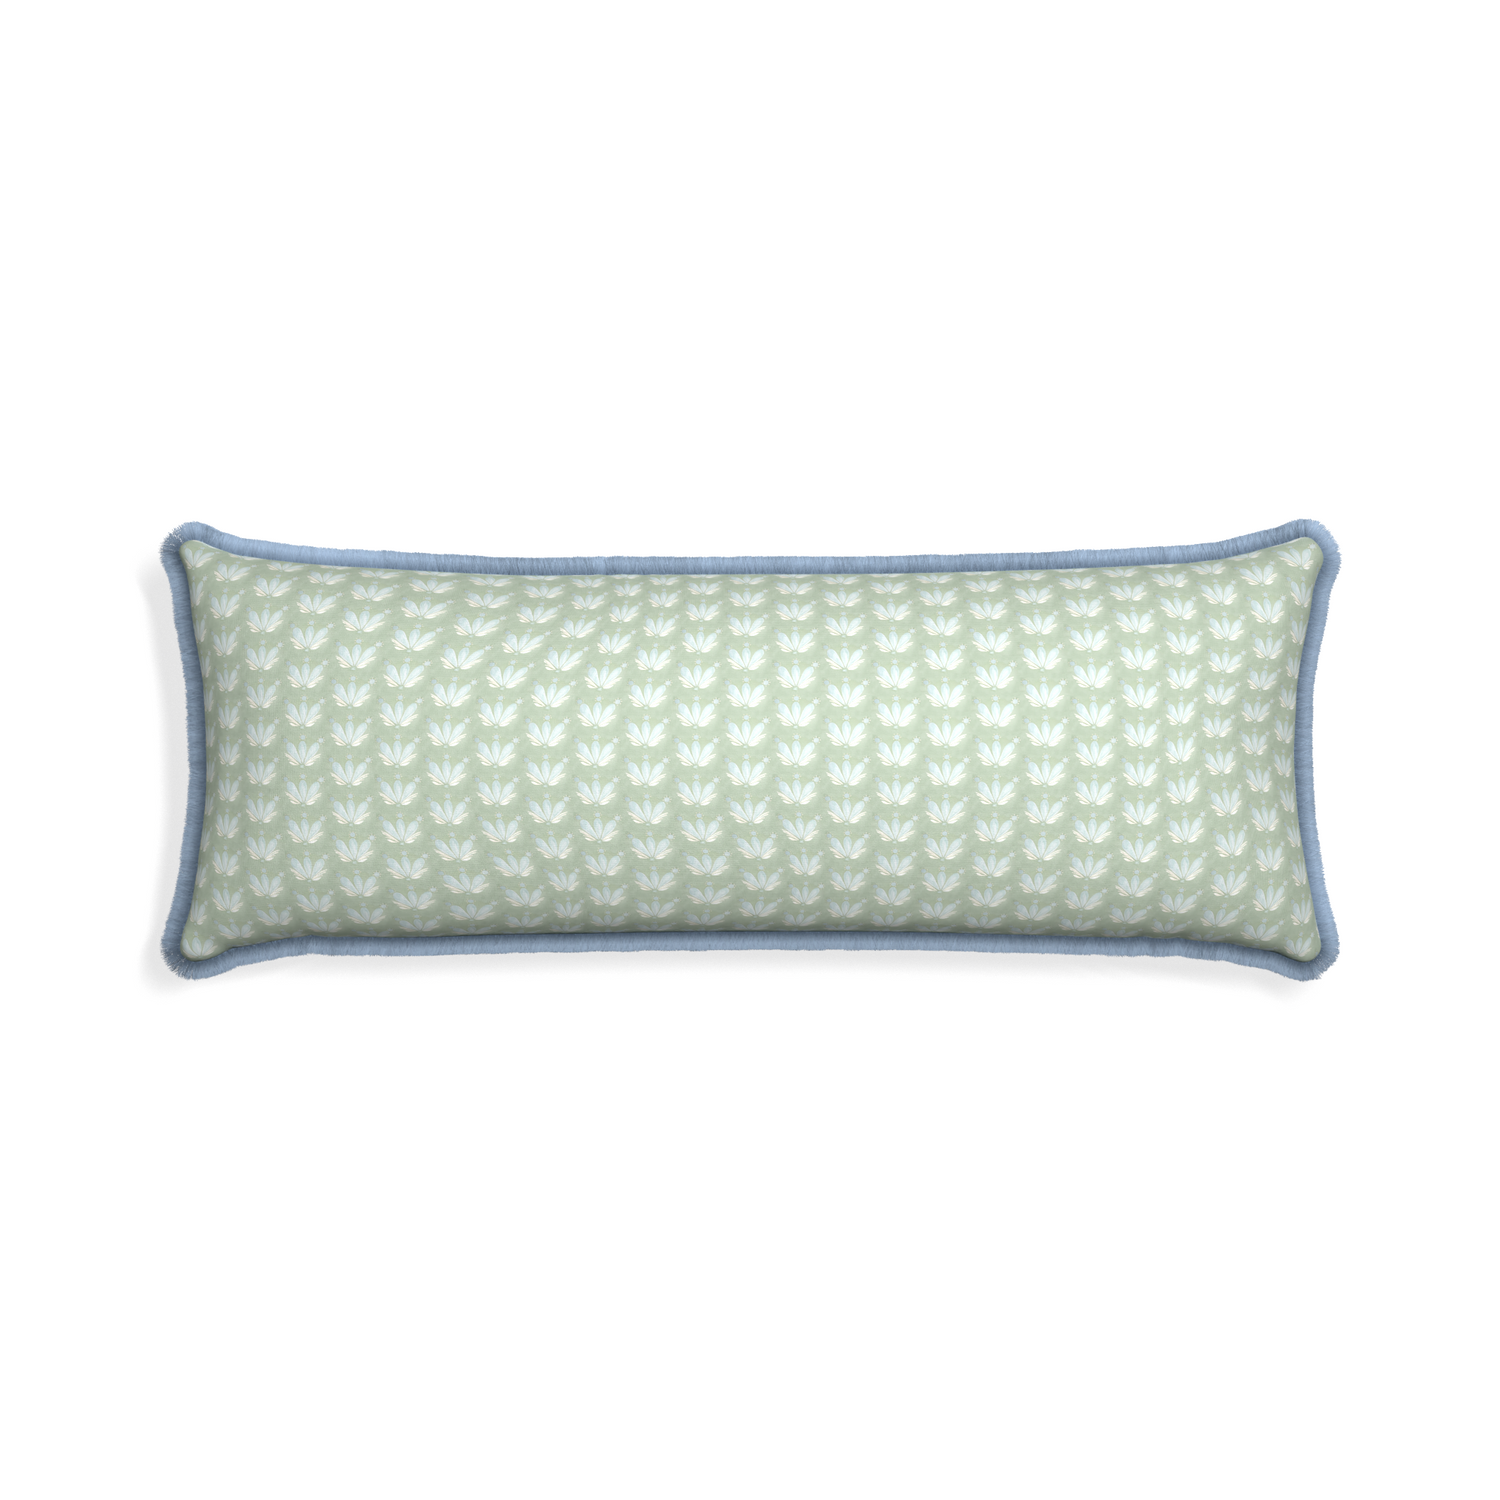 Xl-lumbar serena sea salt custom blue & green floral drop repeatpillow with sky fringe on white background